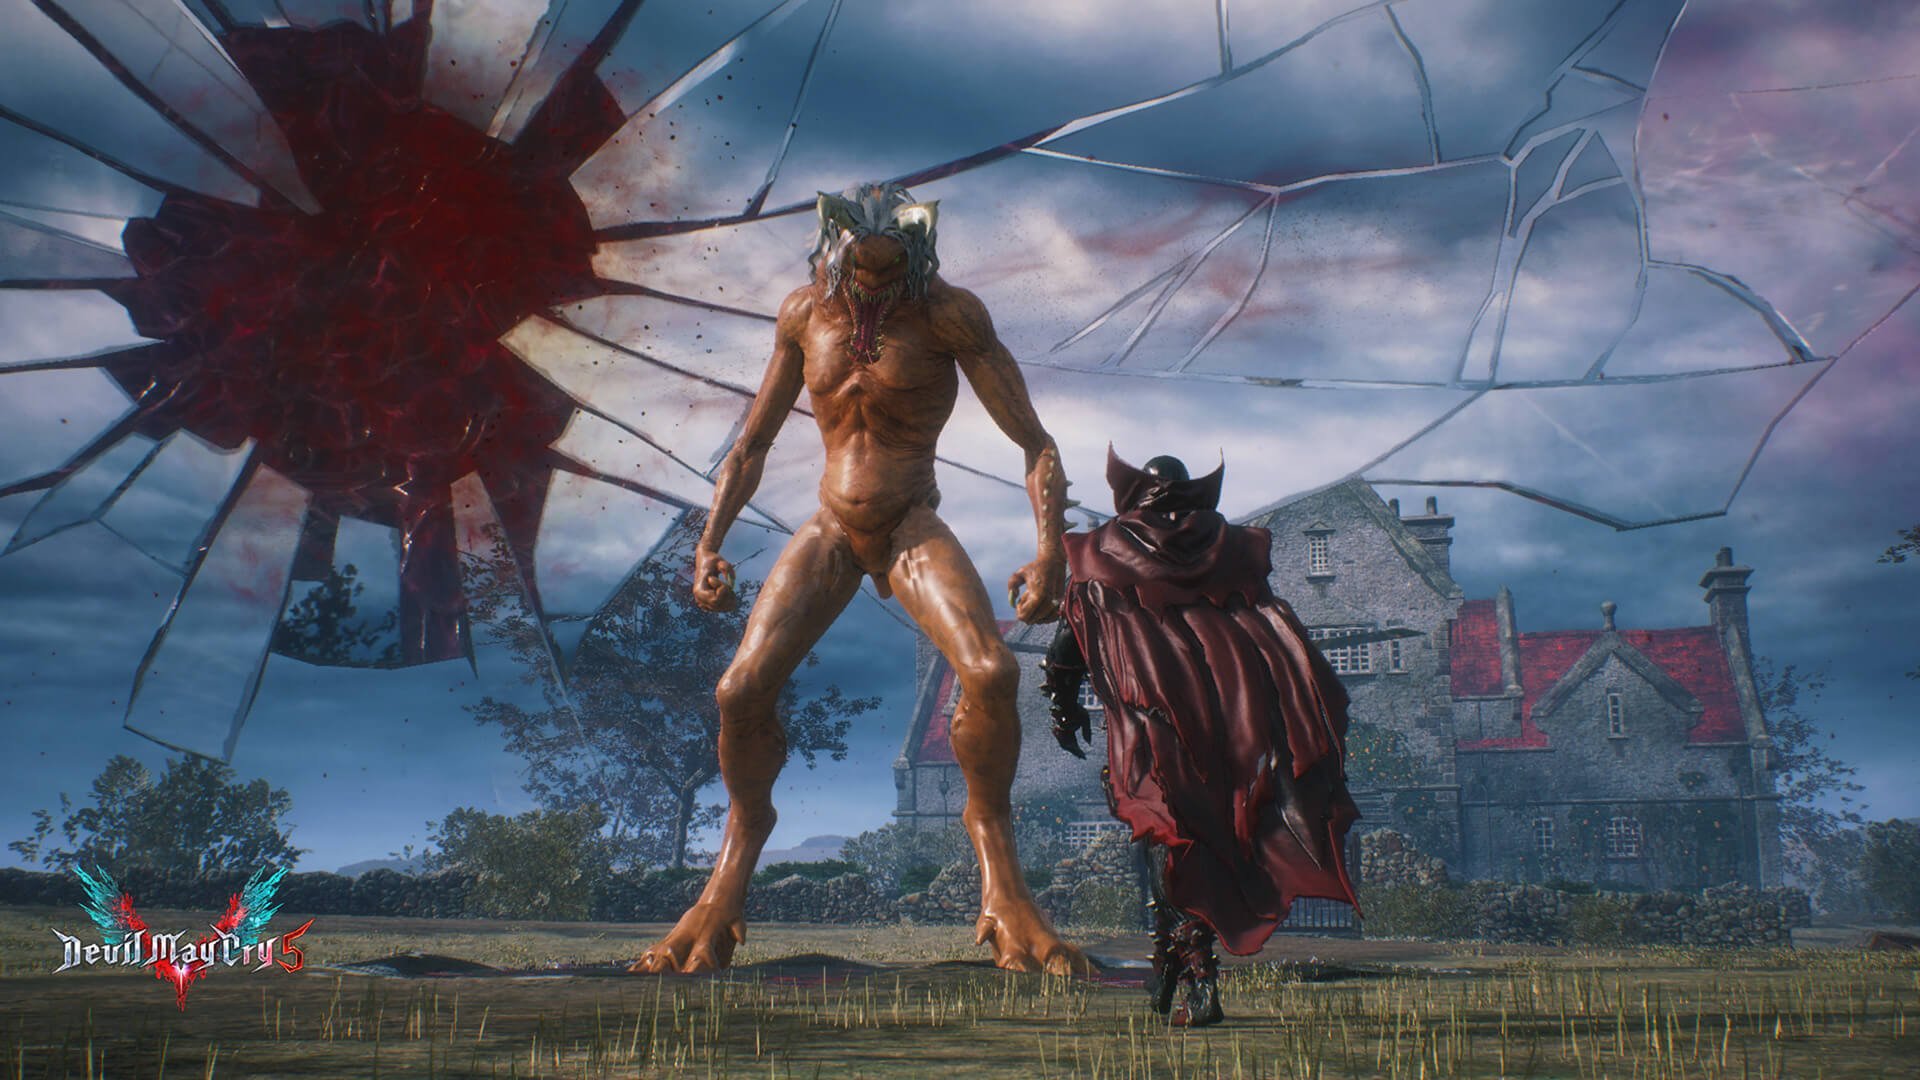 New Spawn Content Mod Pack for Devil May Cry 5 is now available for download